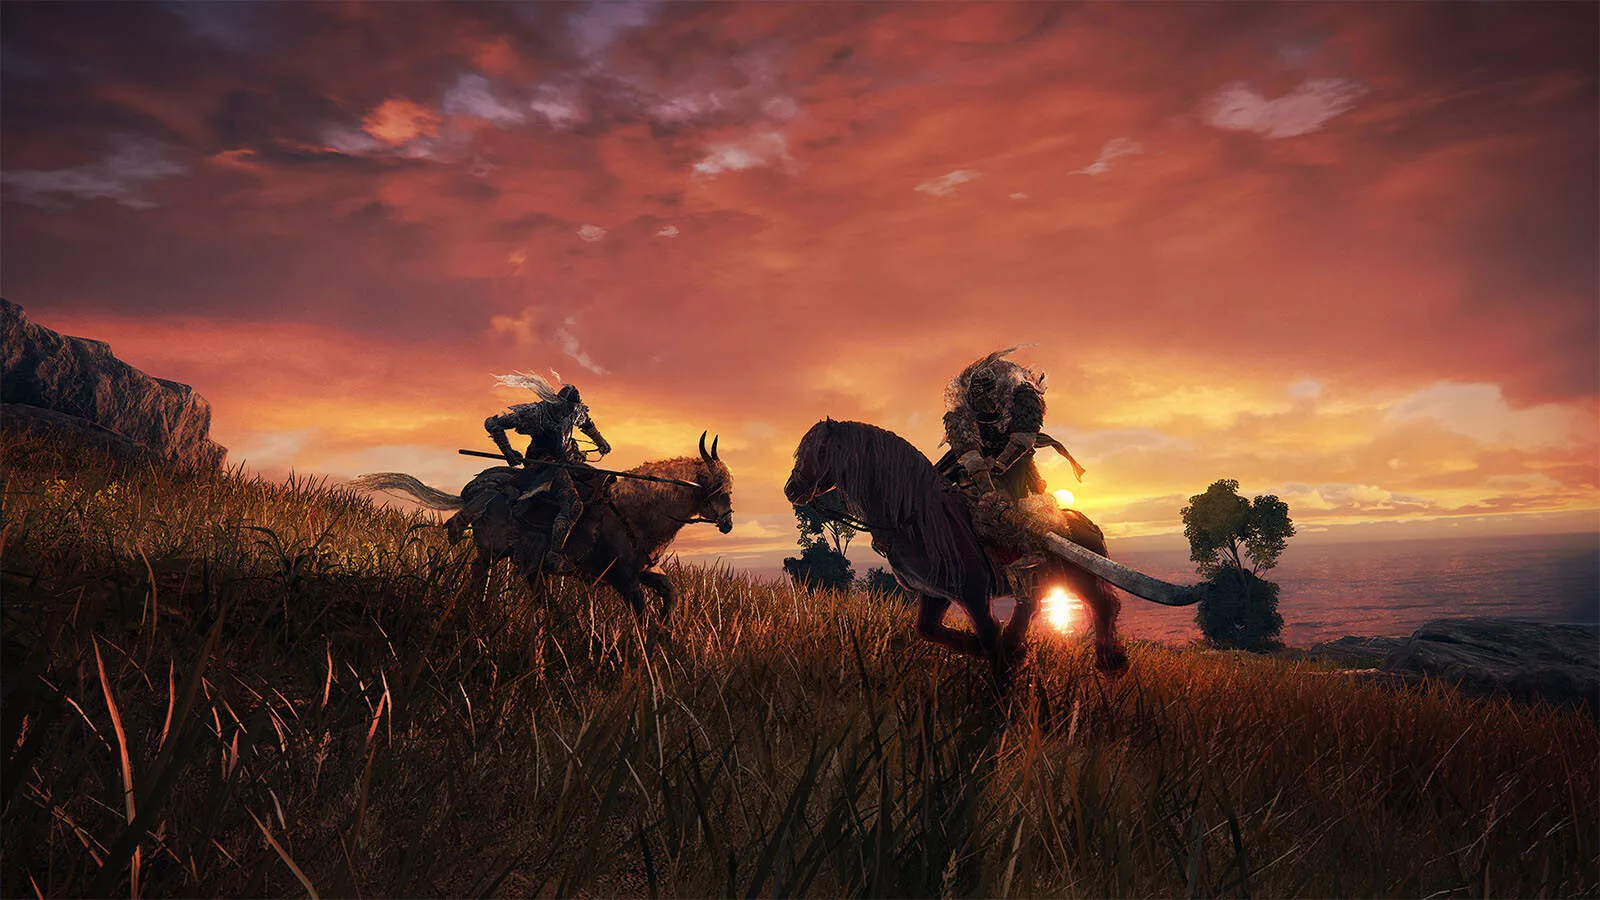 An image of two warriors fighting on horseback while the sun sets behind them.